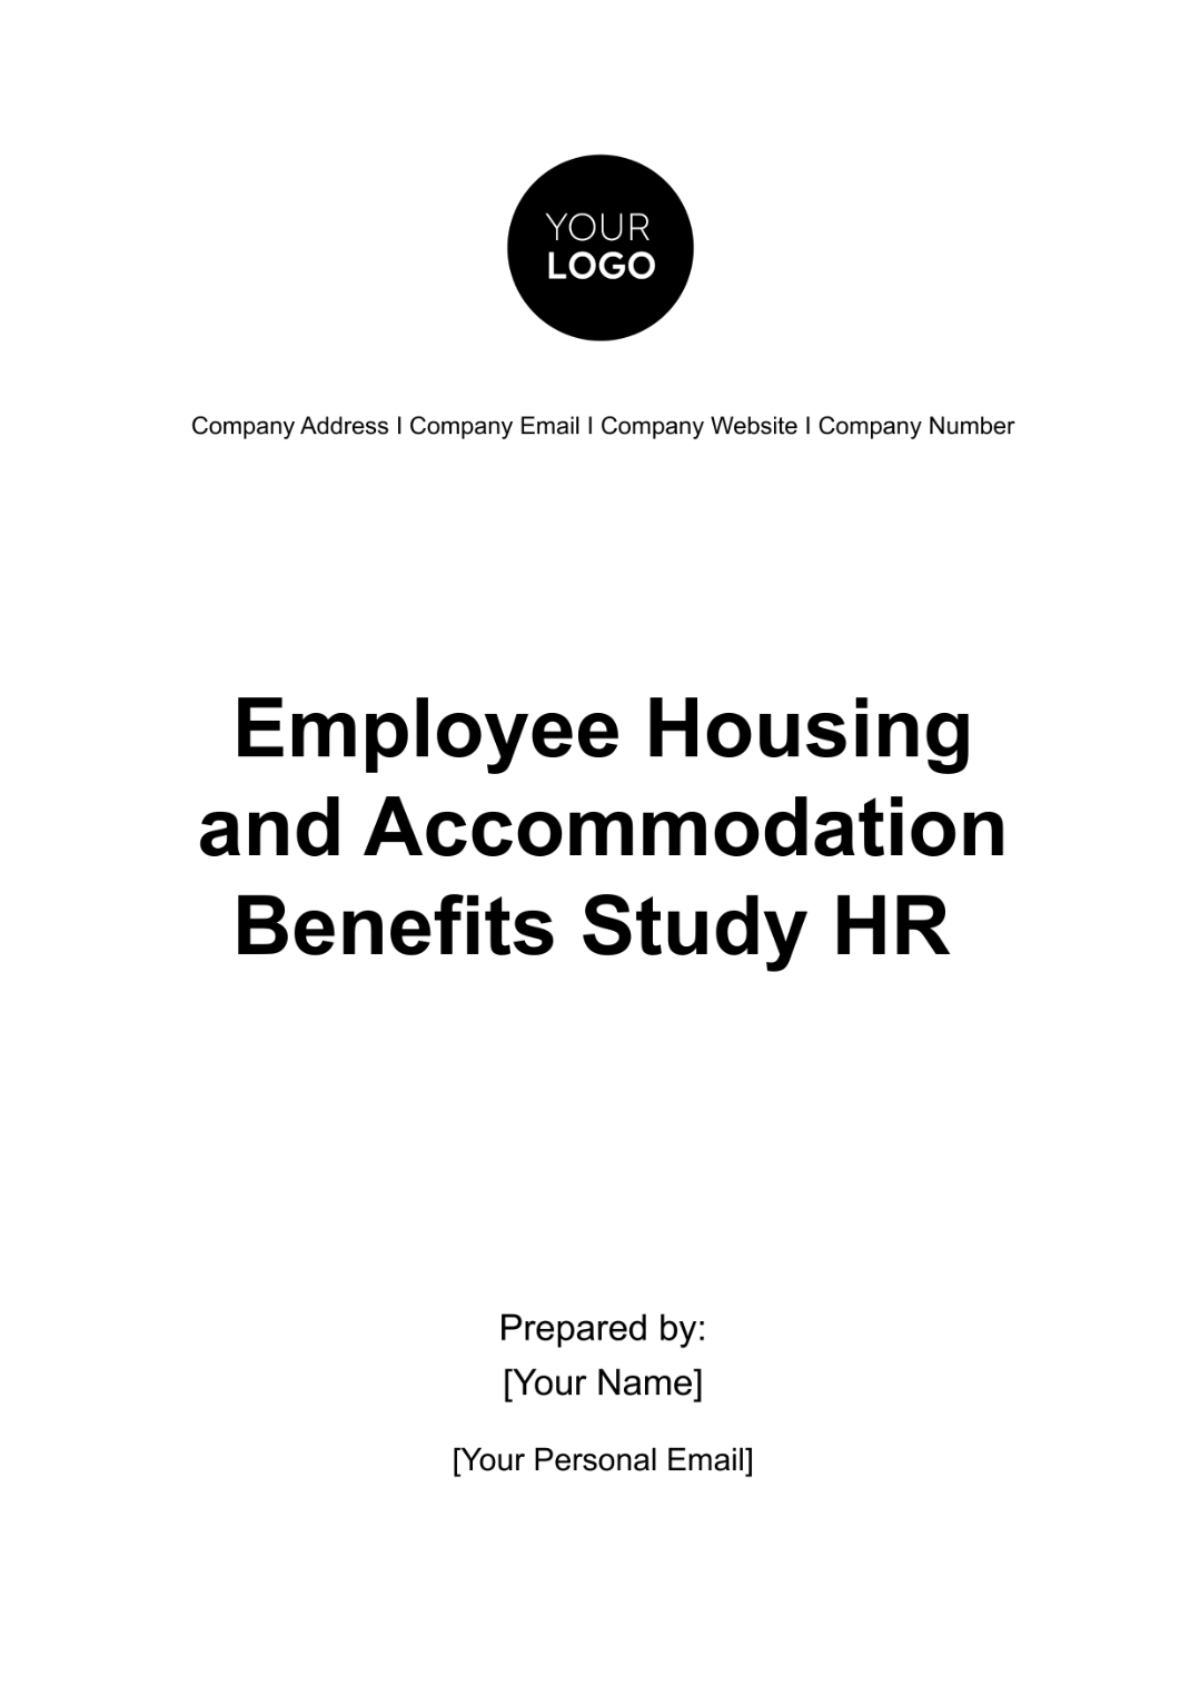 Free Employee Housing and Accommodation Benefits Study HR Template